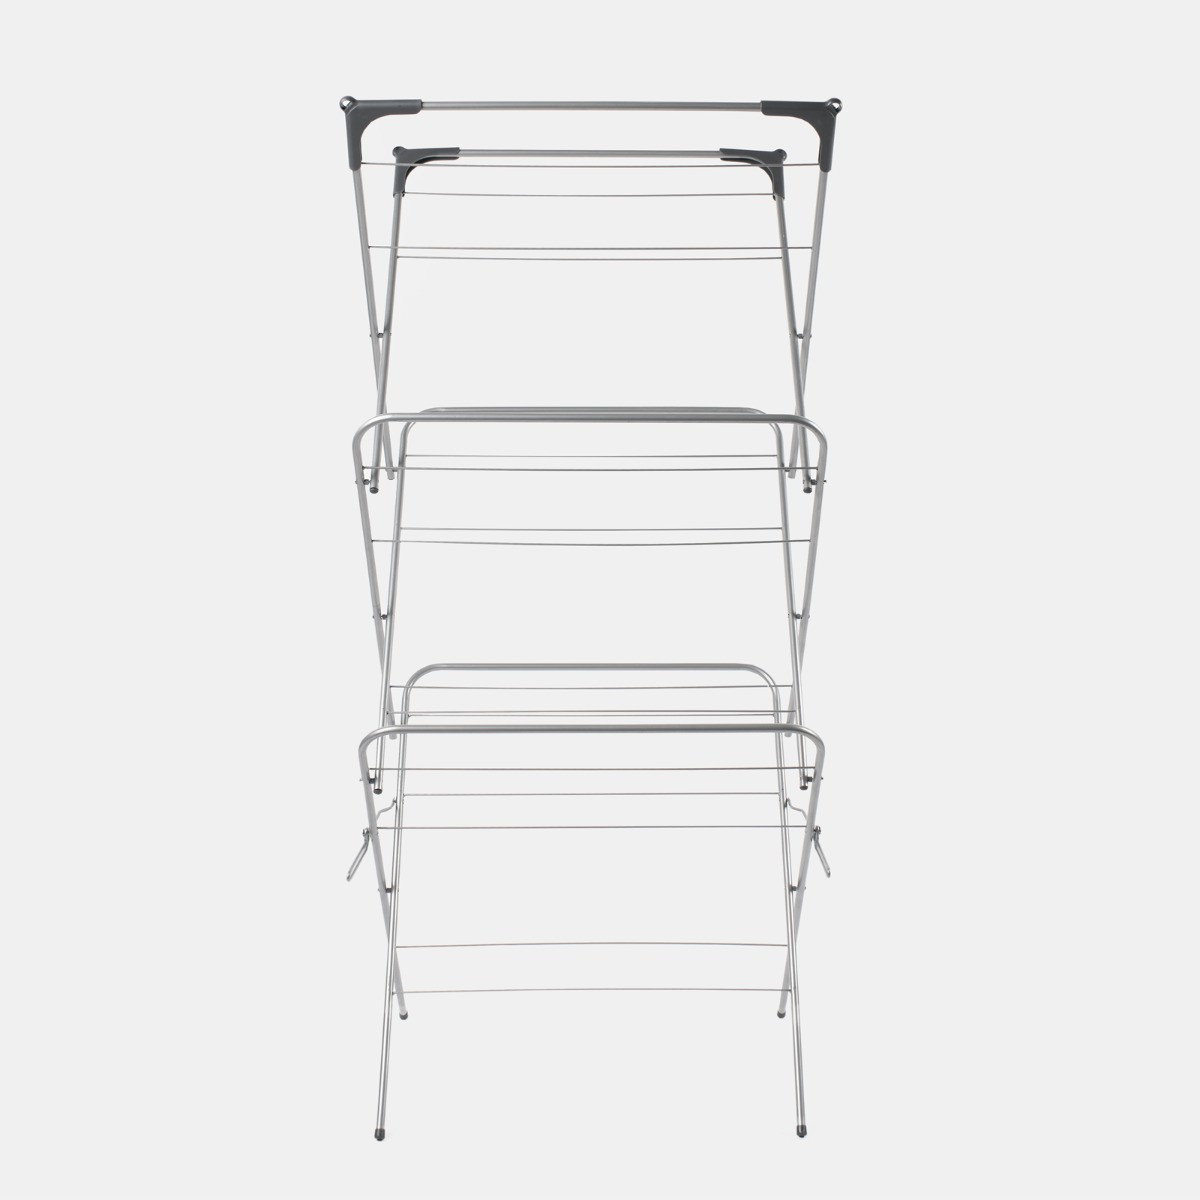 OHS 3 Tier Foldable Clothes Airer, Grey - 15M